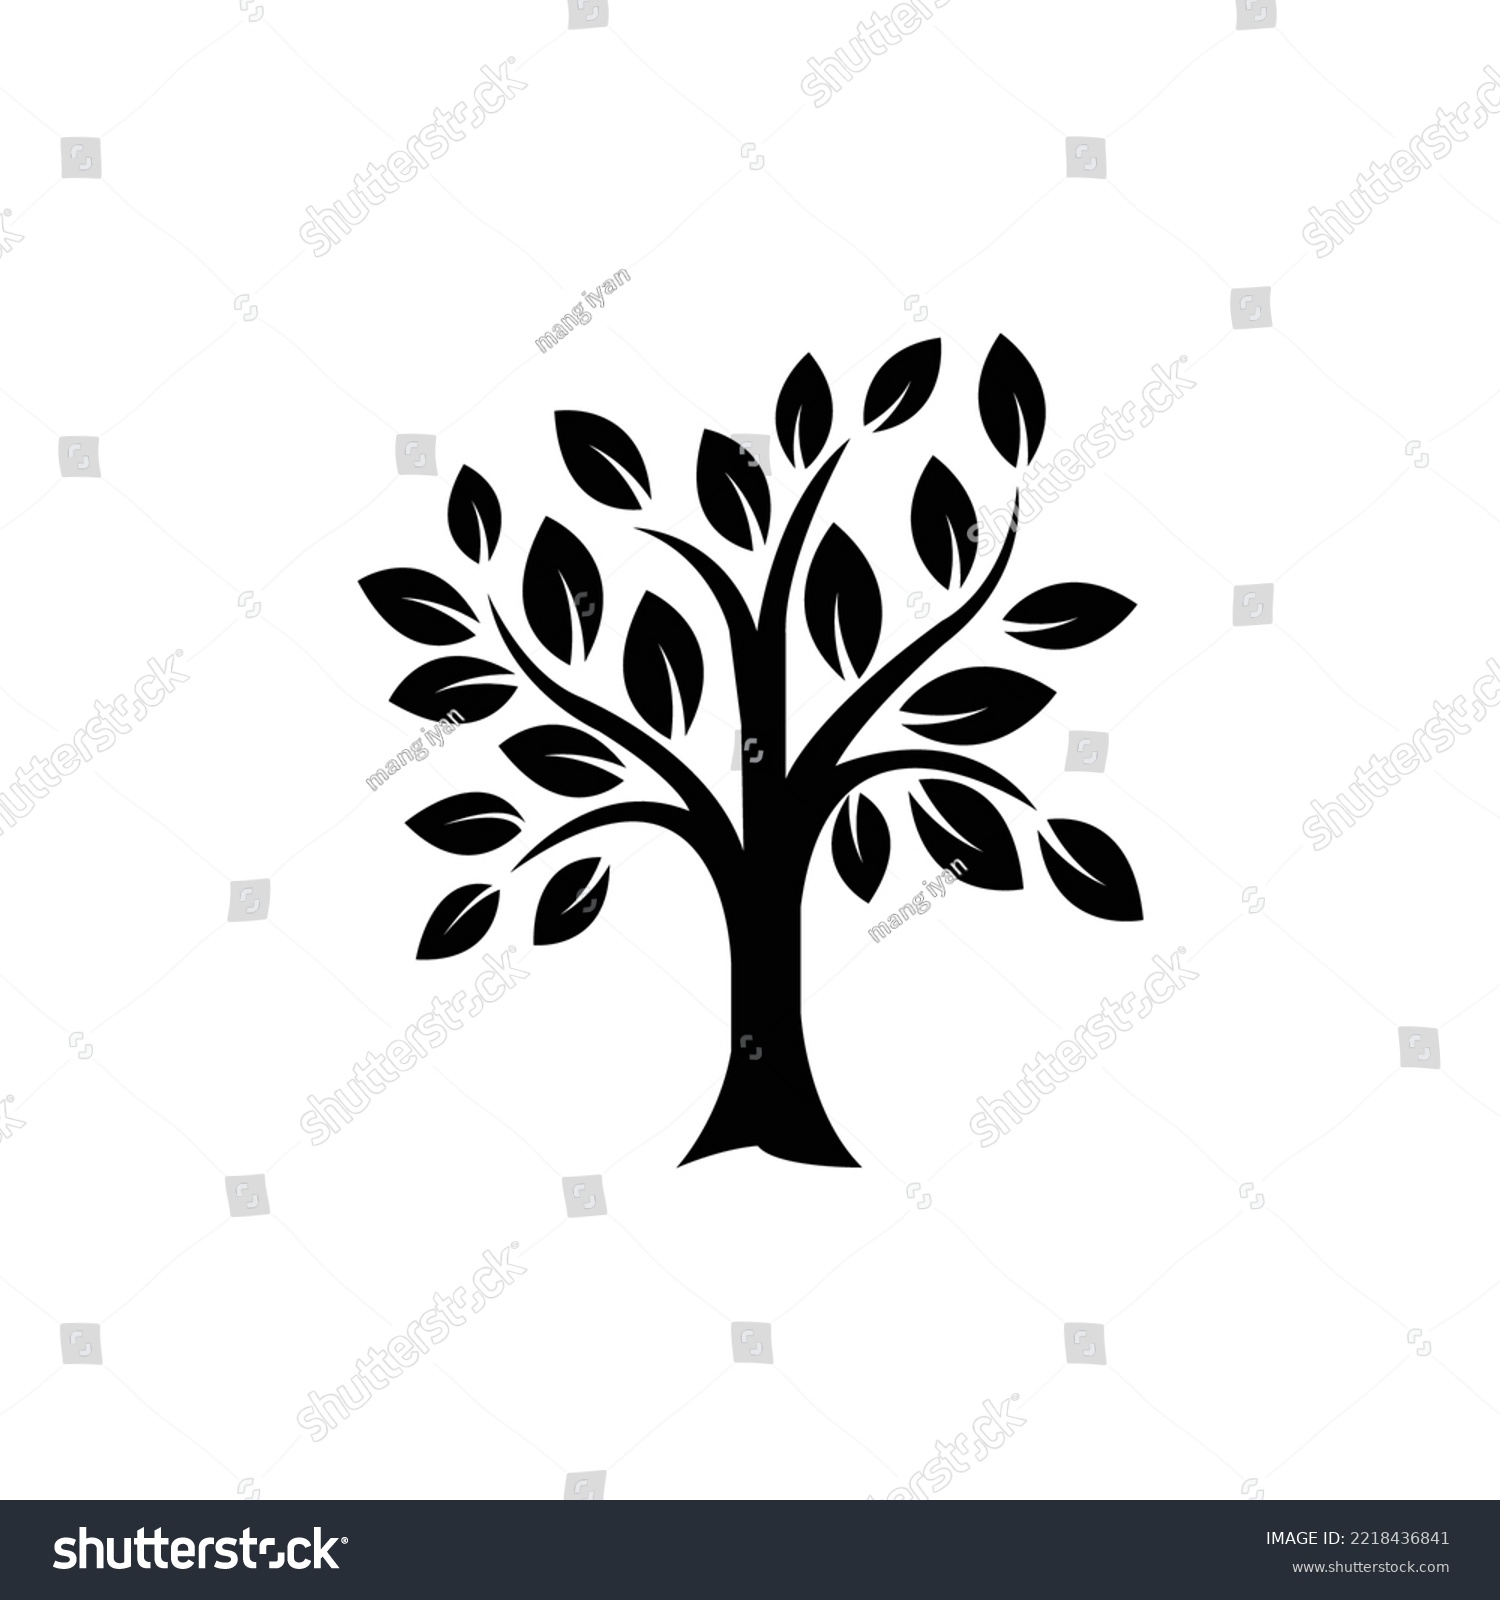 SVG of simple tree decoration silhouette vector image svg